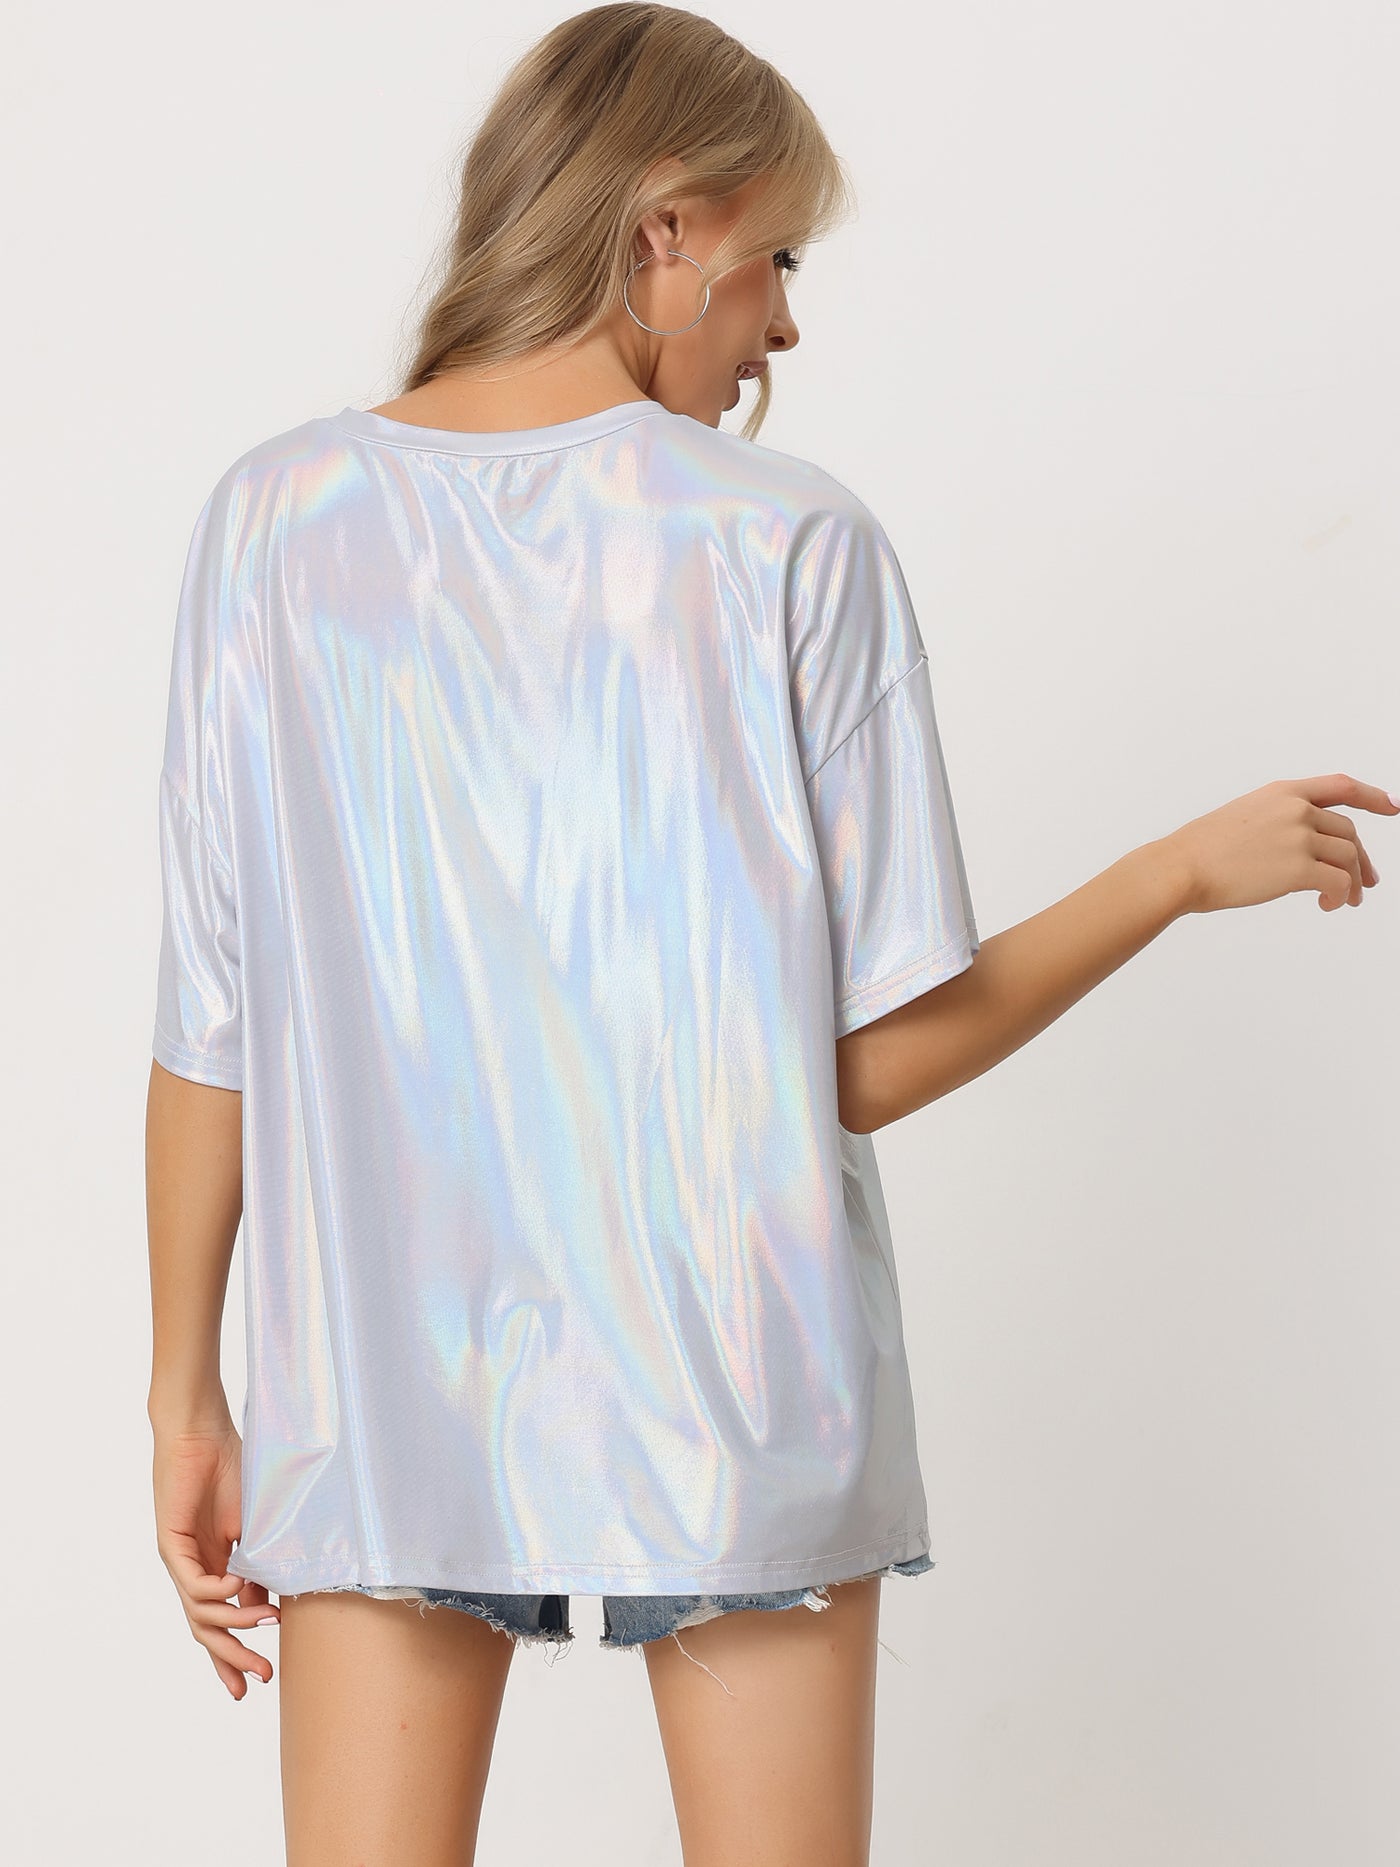 Allegra K Sparkly Short Sleeve Holographic Party Metallic T-Shirt Top